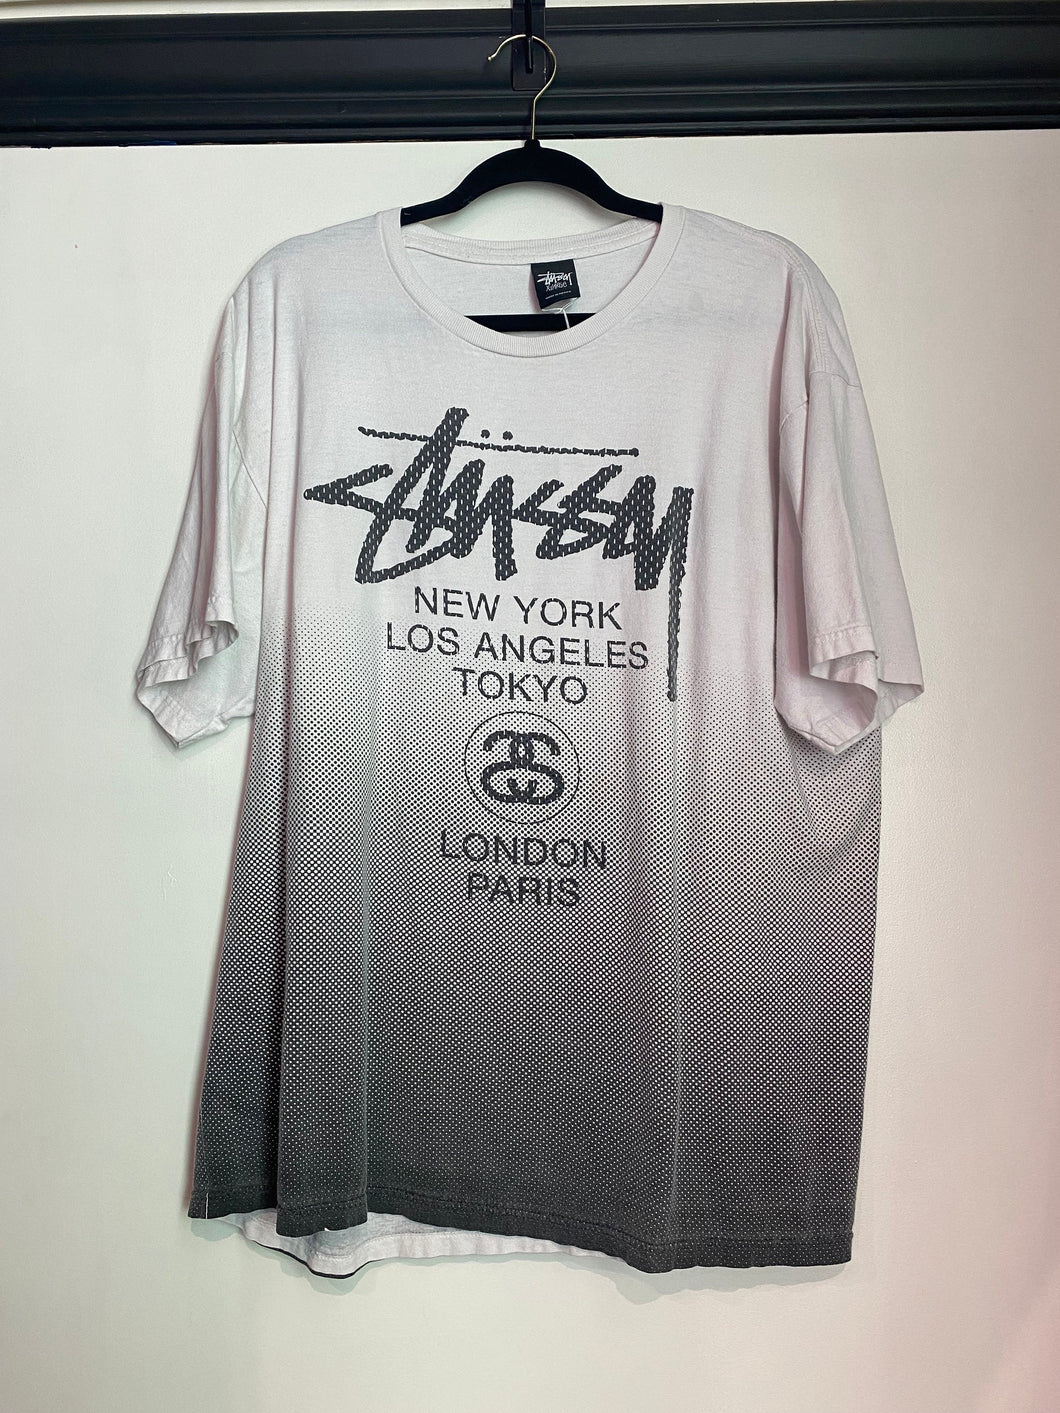 Gradient White and Black Vintage Stüssy Worldwide XL T-Shirt / 80s 90s 2000s Graphic Tee